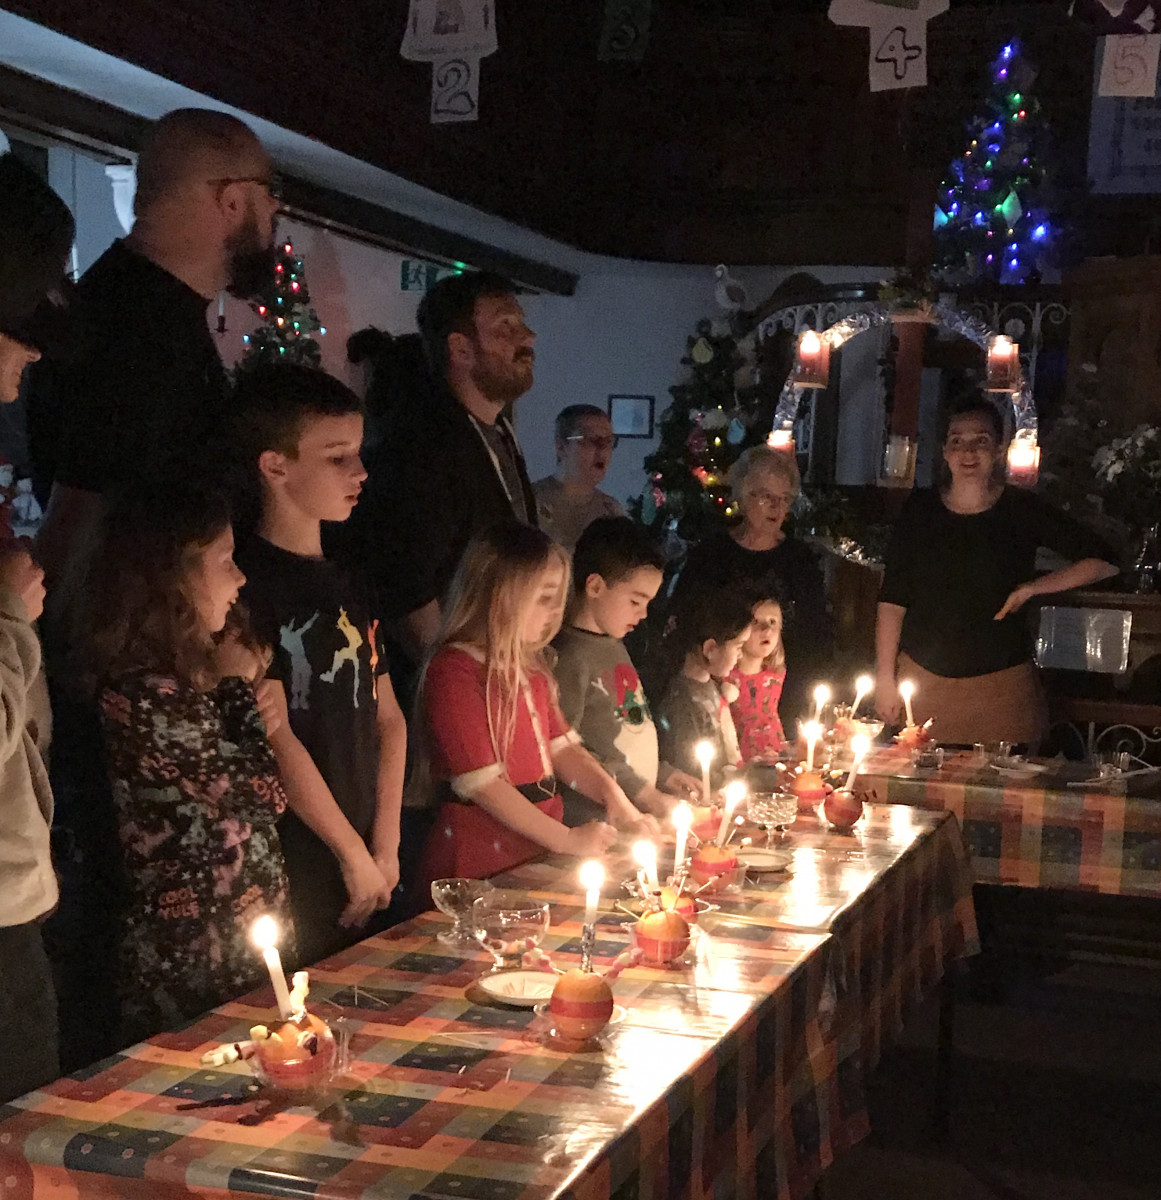 All ages attend Trinity Radstock Christingle Service